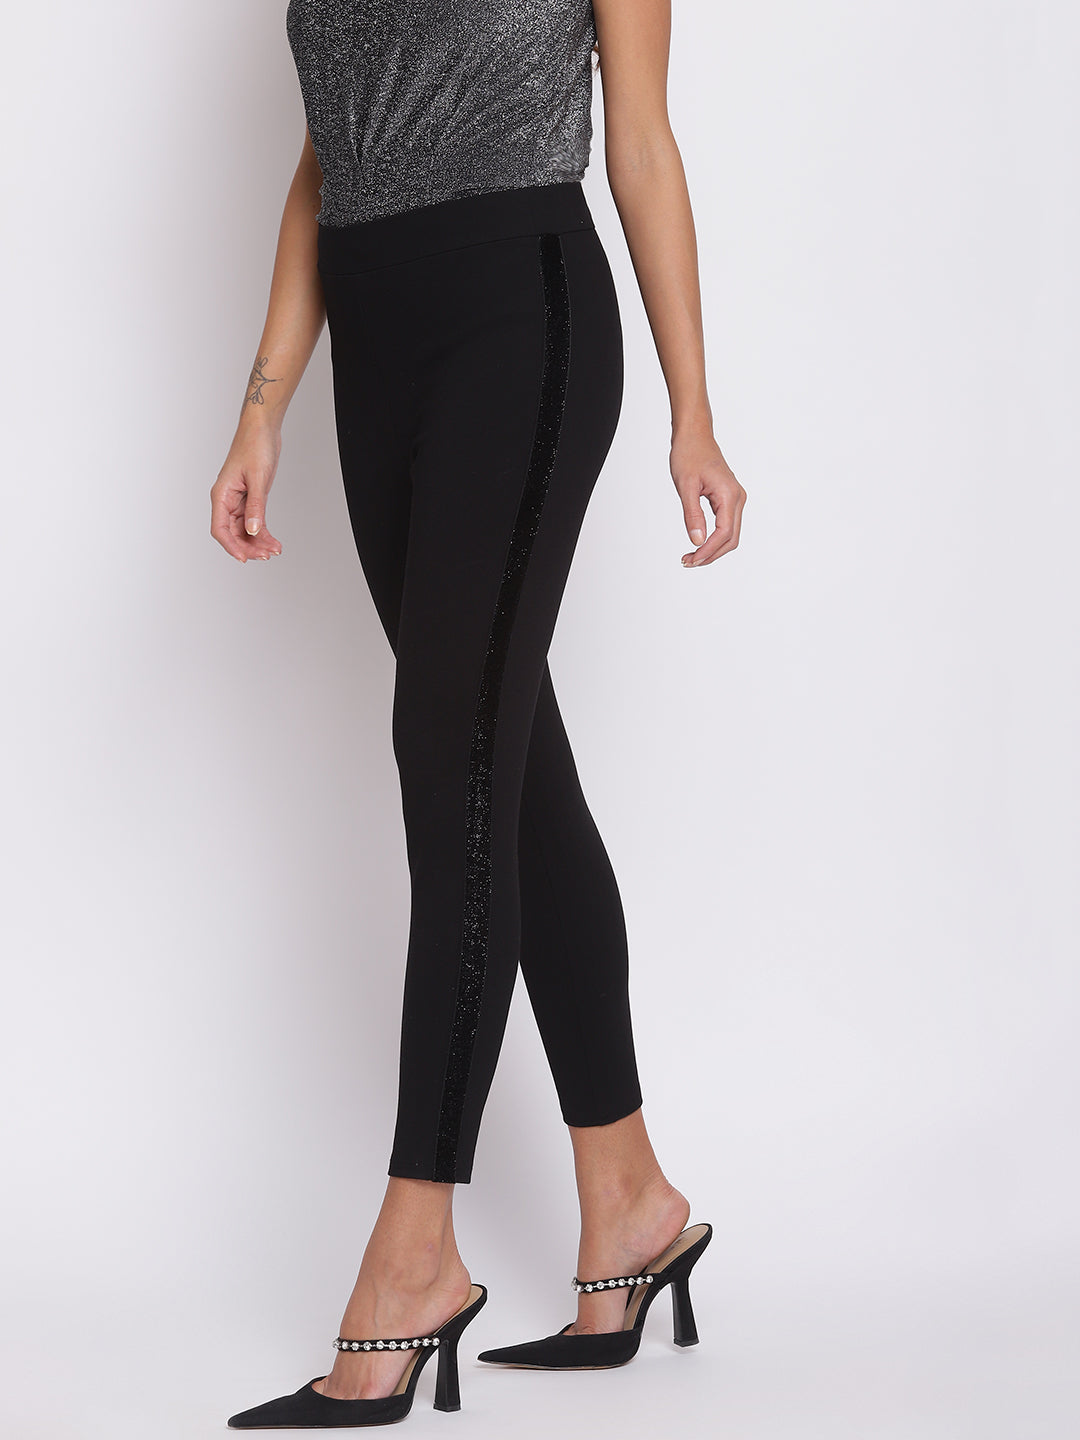 Black Solid Roma Jeggings With Tape